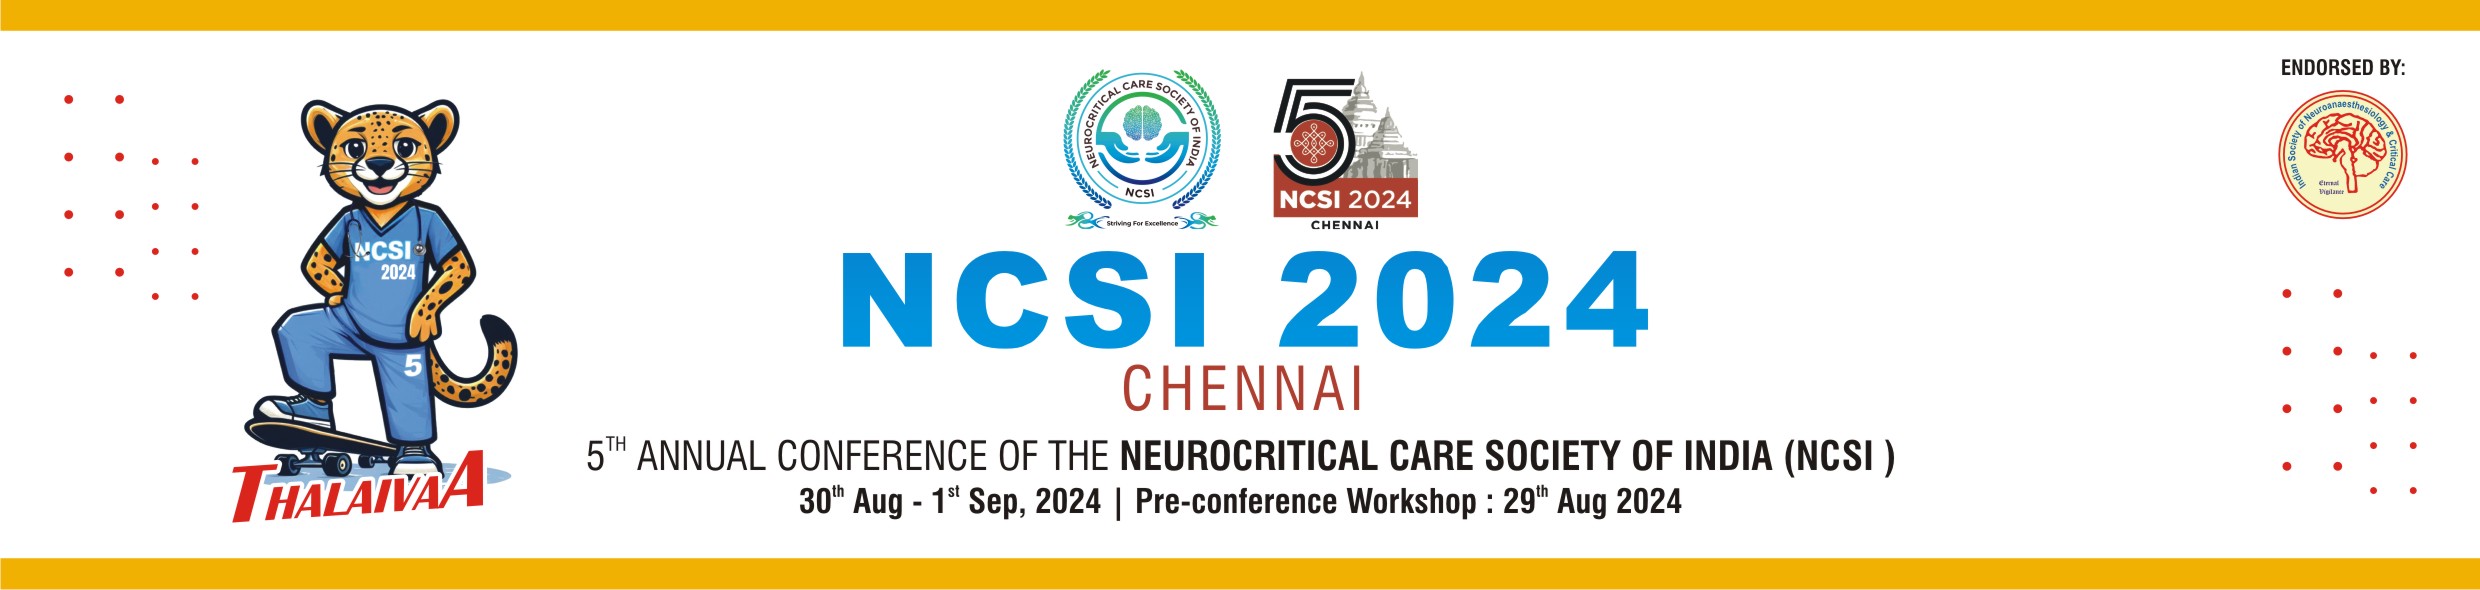 NCSI 2024 Abstract Submission